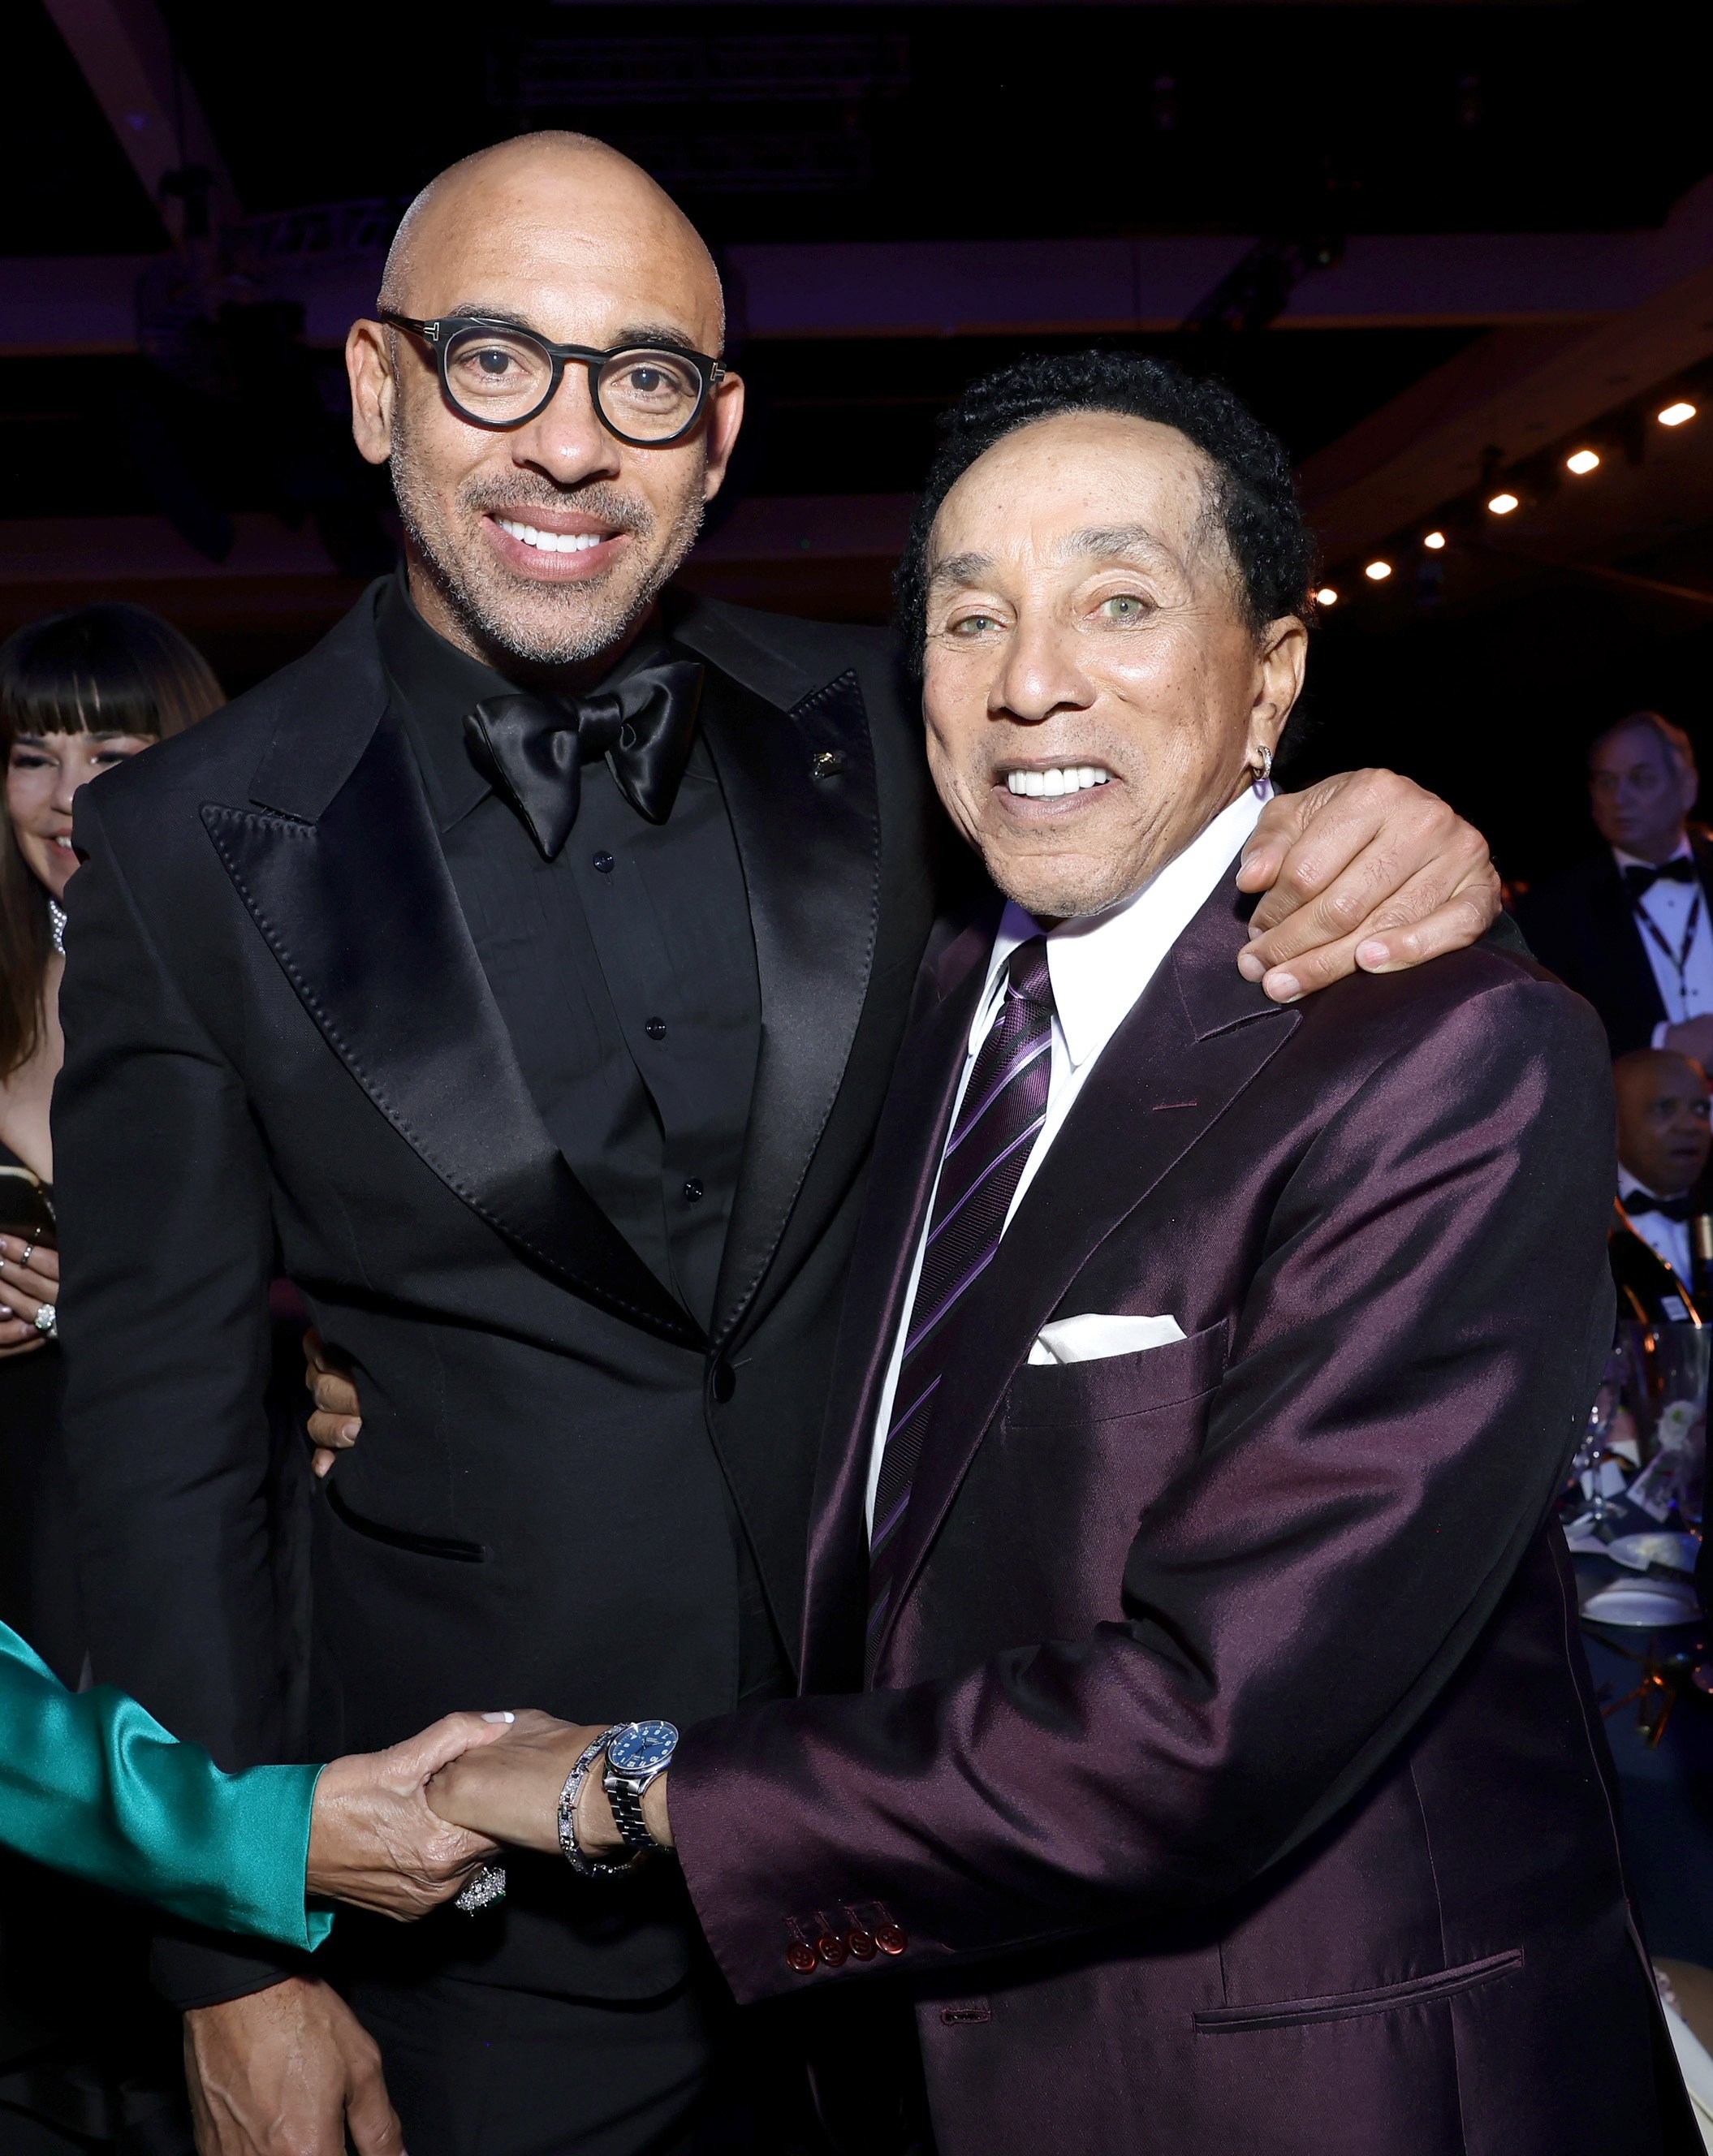  LOS ANGELES, CALIFORNIA - FEBRUARY 03: (L-R) CEO of the Recording Academy and MusiCares Harvey Mason jr. and honoree Smokey Robinson attend MusiCares Persons of the Year Honoring Berry Gordy and Smokey Robinson at Los Angeles Convention Center on Fe